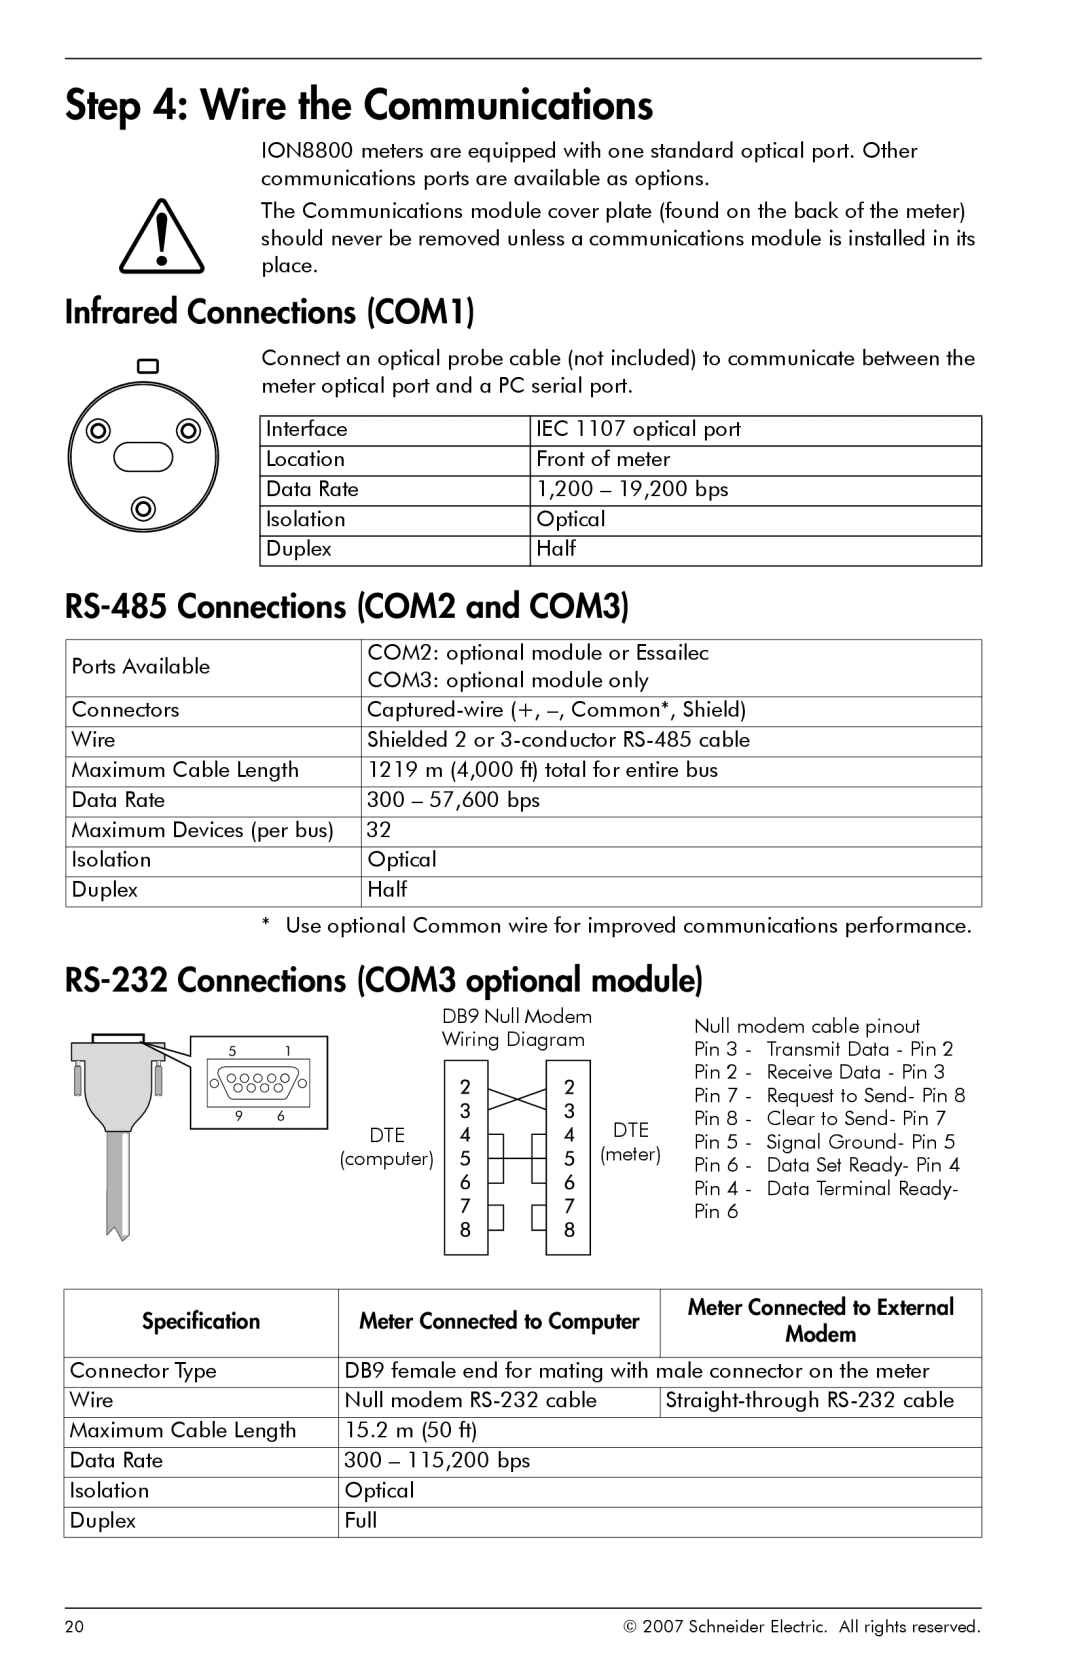 Schneider Electric ION8800 manual Wire the Communications, Infrared Connections COM1, RS-485 Connections COM2 and COM3 